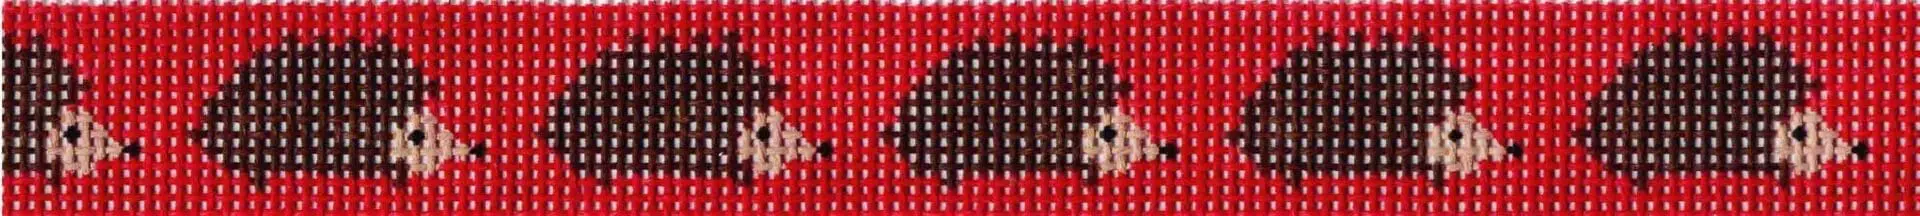 An image of a red and black striped cloth.